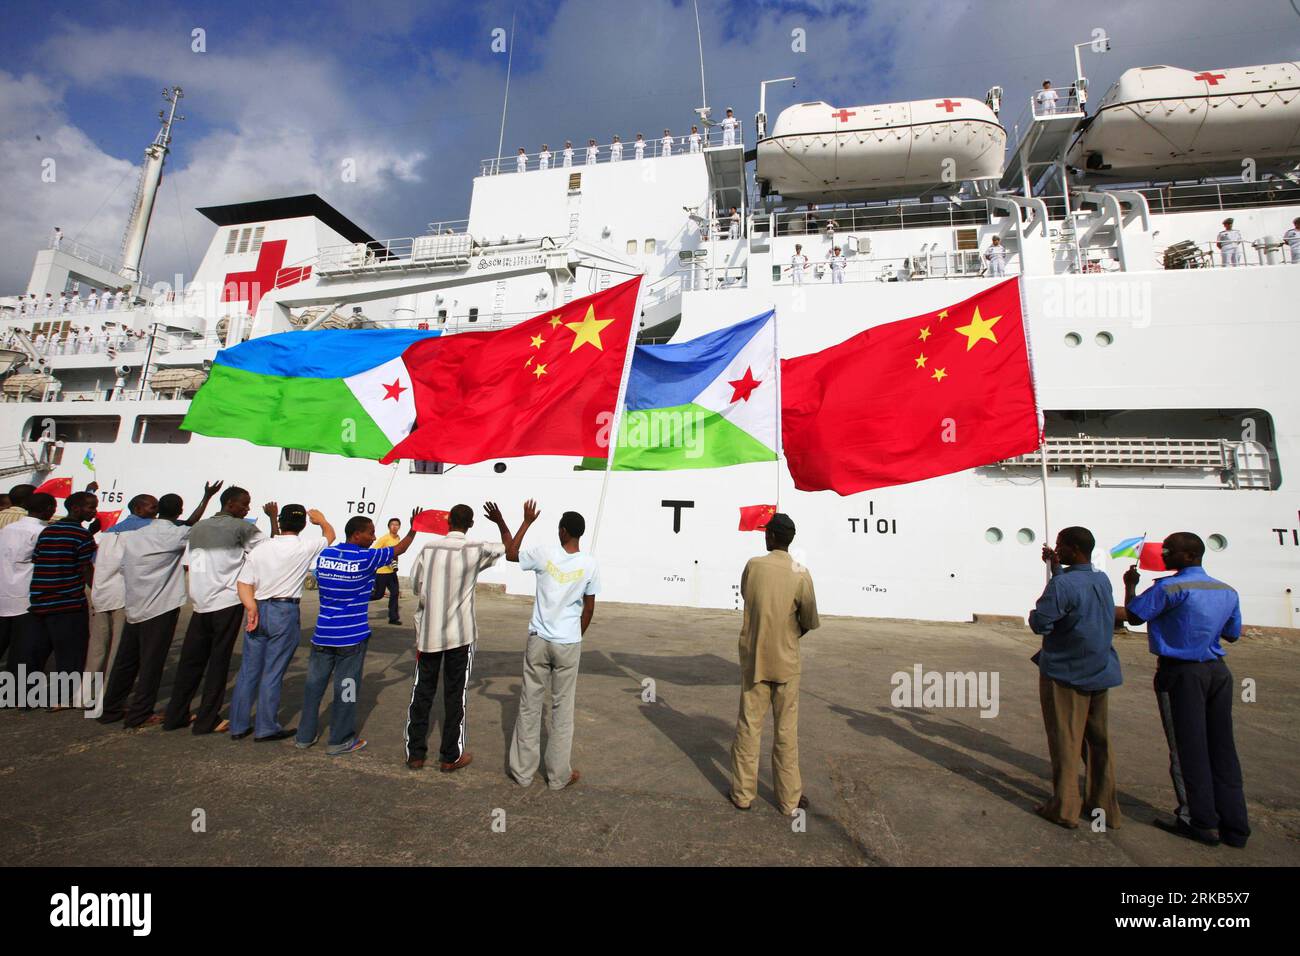 Bildnummer: 54485732  Datum: 29.09.2010  Copyright: imago/Xinhua (100929) -- DJIBOUTI, Sept. 29, 2010 (Xinhua) -- wave national flags of China and Djibouti in front of China s hospital ship Peace Ark at the port of Djibouti, Sept. 29, 2010. The Peace Ark left for Kenya on Wednesday after providing medical services for local residents in Djibouti for a week. (Xinhua/Zha Chunming) (nxl) DJIBOUTI-CHINA-HOSPITAL SHIP-PEACE ARK-DEPARTURE PUBLICATIONxNOTxINxCHN Gesellschaft Friedensschiff Abschied Verabschiedung Schiff kbdig xsk 2010 quer  Hospitalschiff Krankenhausschiff    Bildnummer 54485732 Date Stock Photo